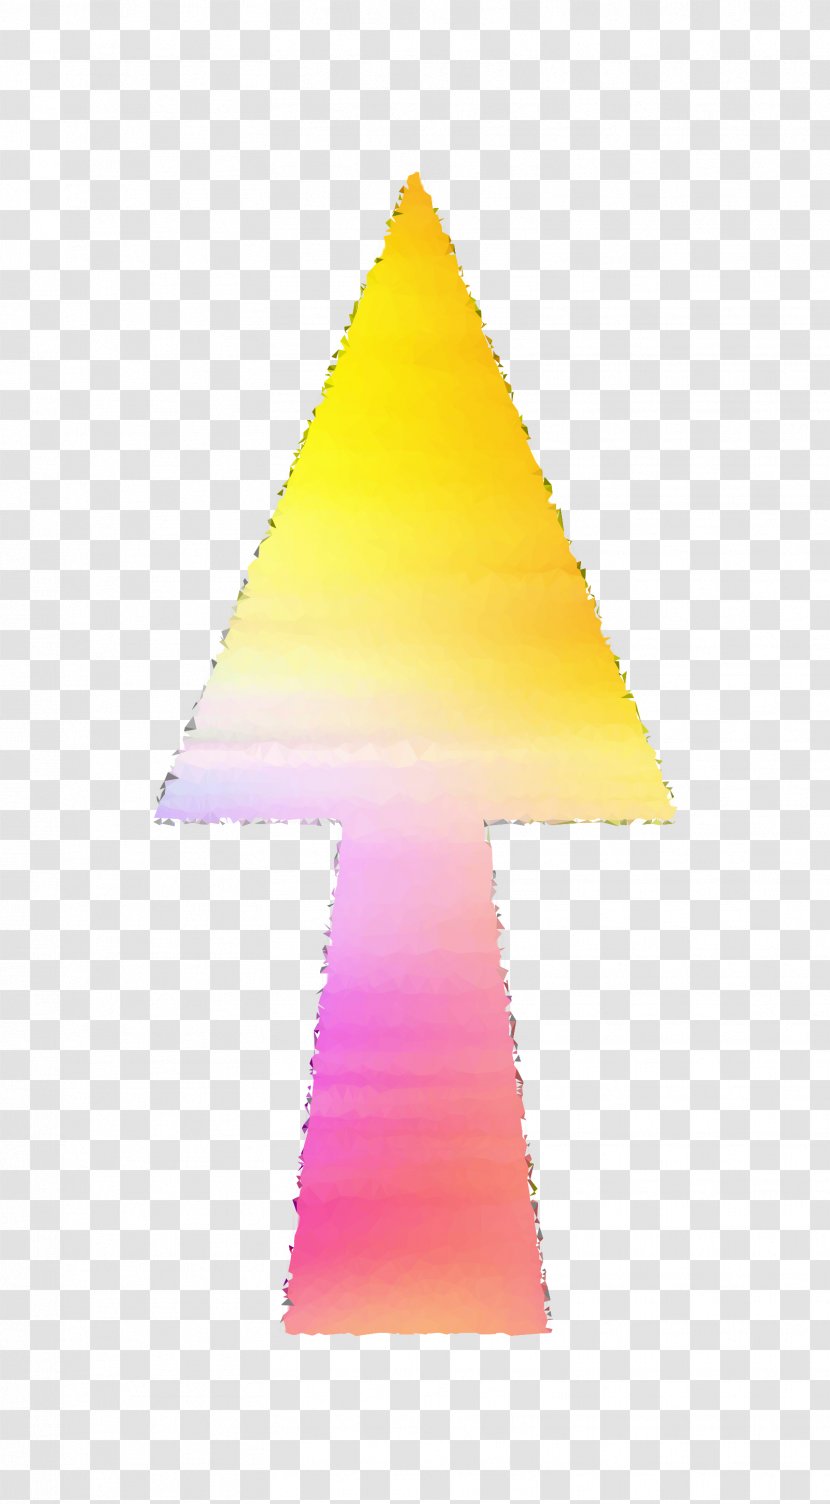 Triangle Text Messaging - Tree Transparent PNG